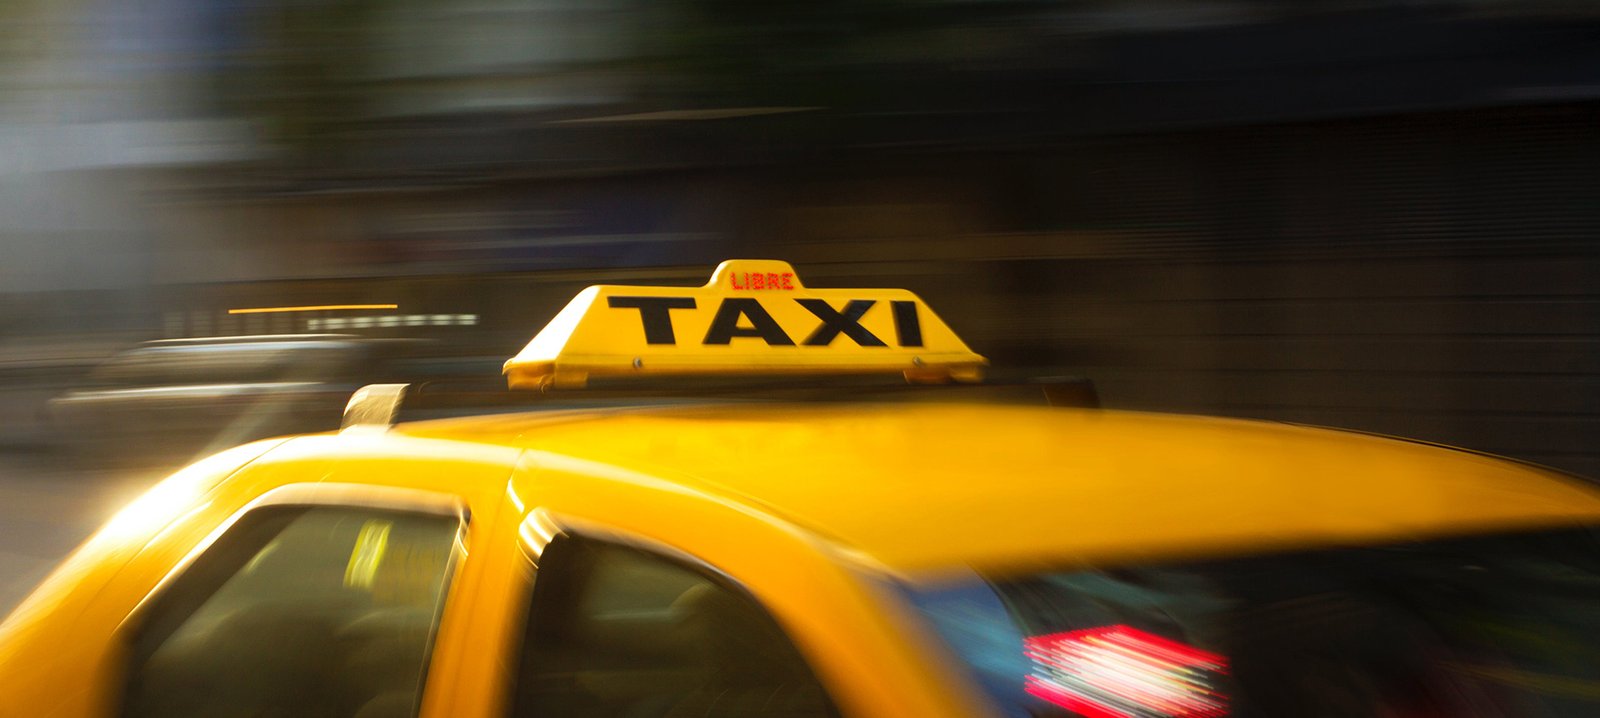 The Fast Lane: Understanding India’s Taxi Service Industry